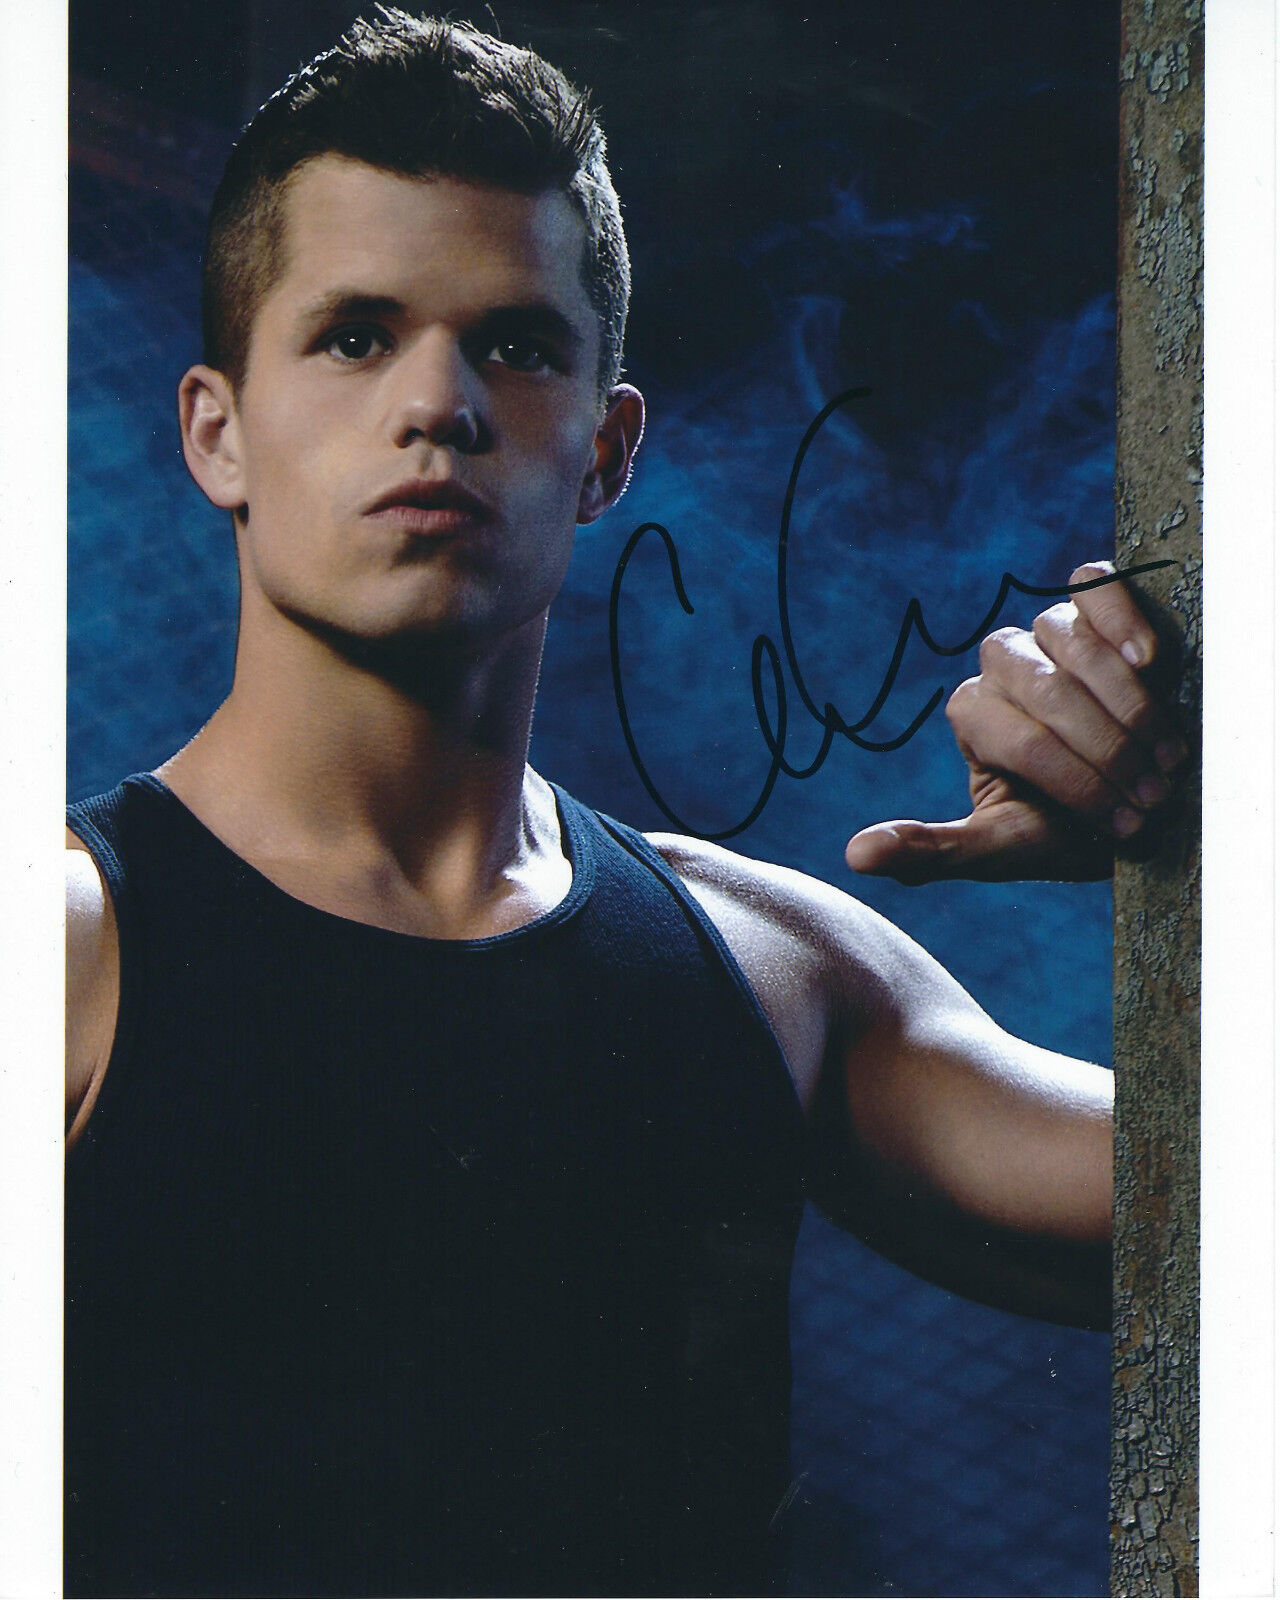 CHARLIE CARVER TEEN WOLF AUTOGRAPHED Photo Poster painting SIGNED 8X10 #1 ETHAN STEINER